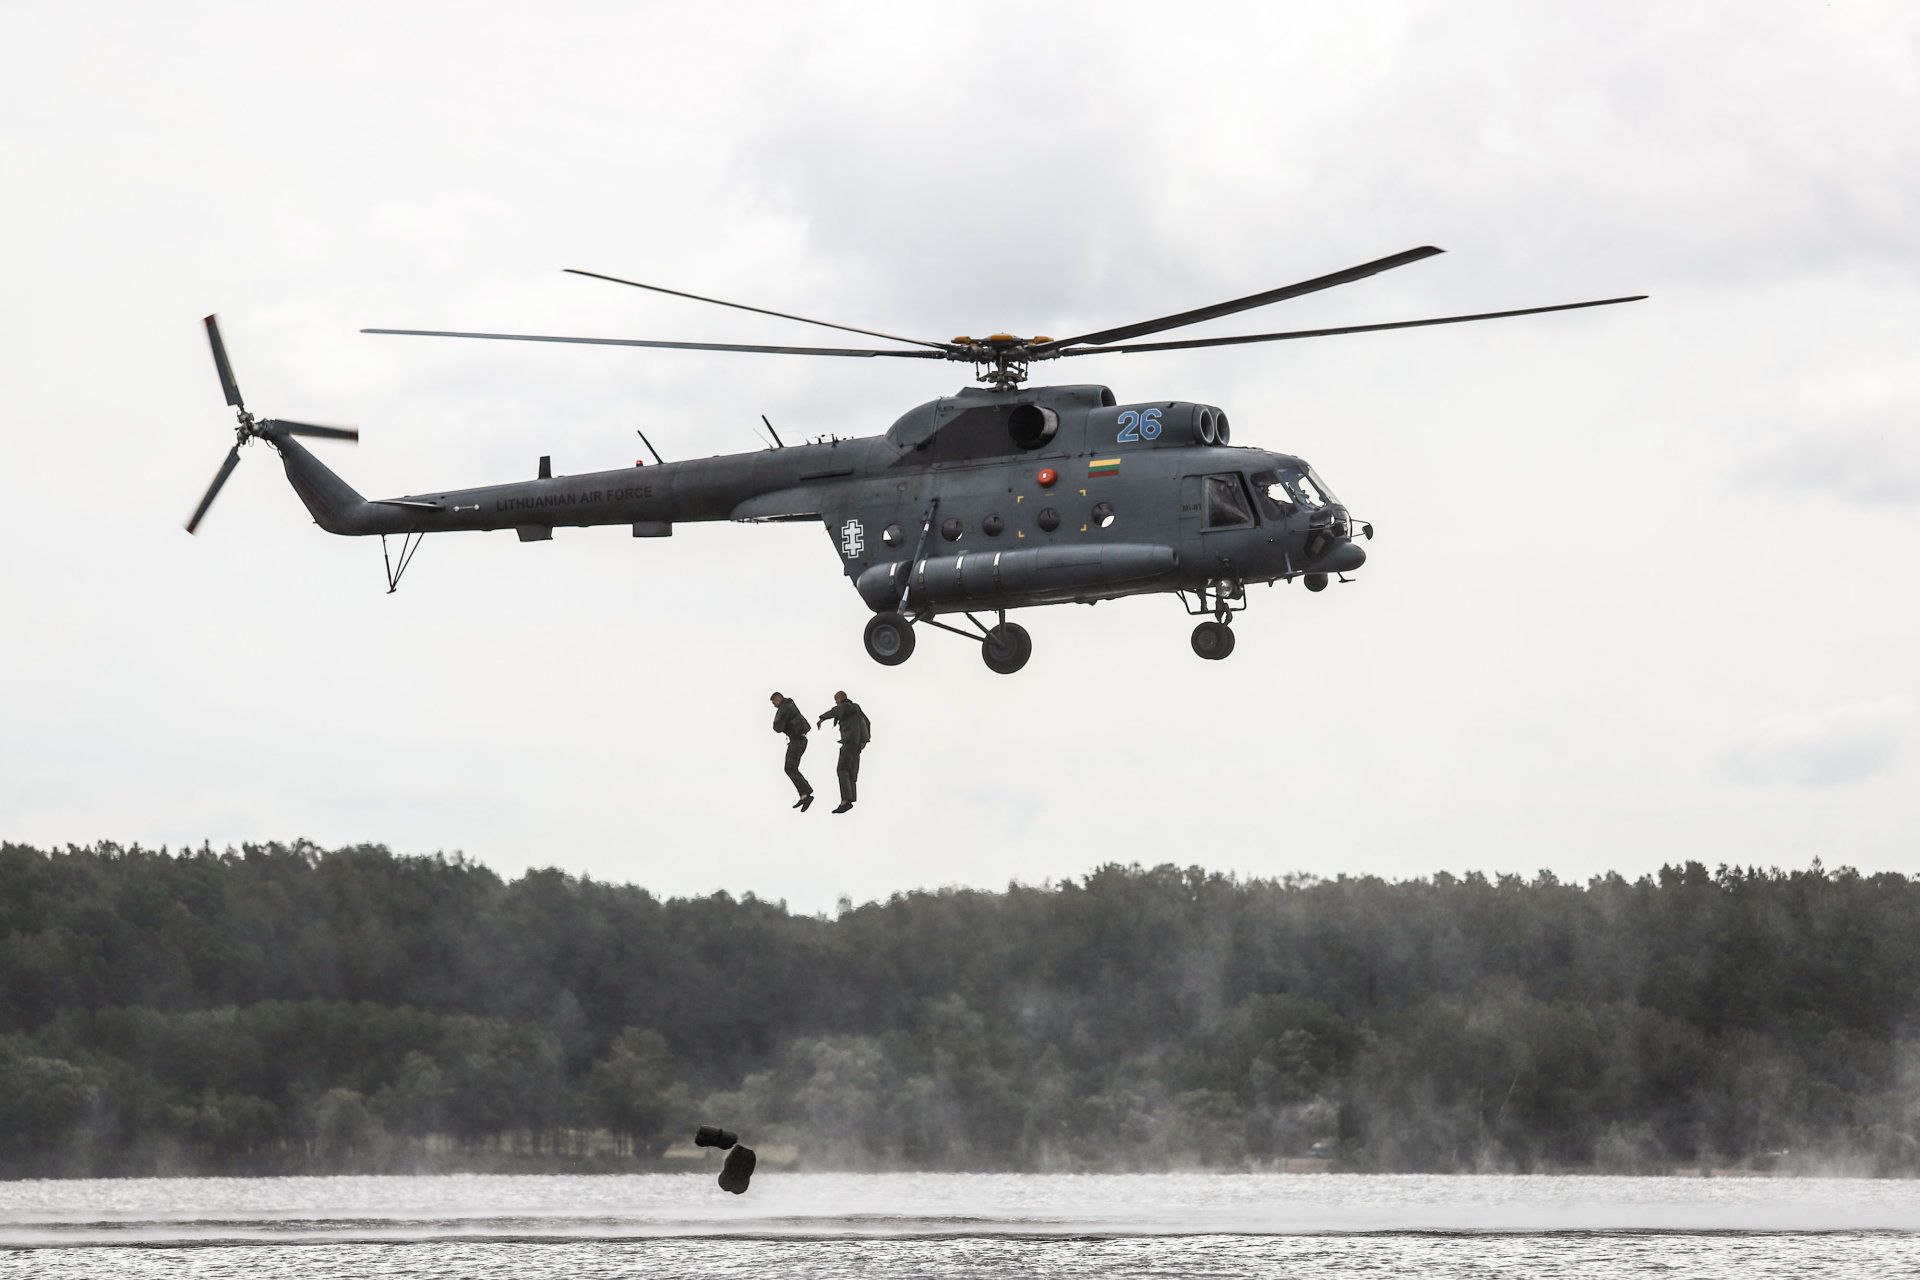 A LTAF Mil Mi-8 hovering over water as military personnel jump out.